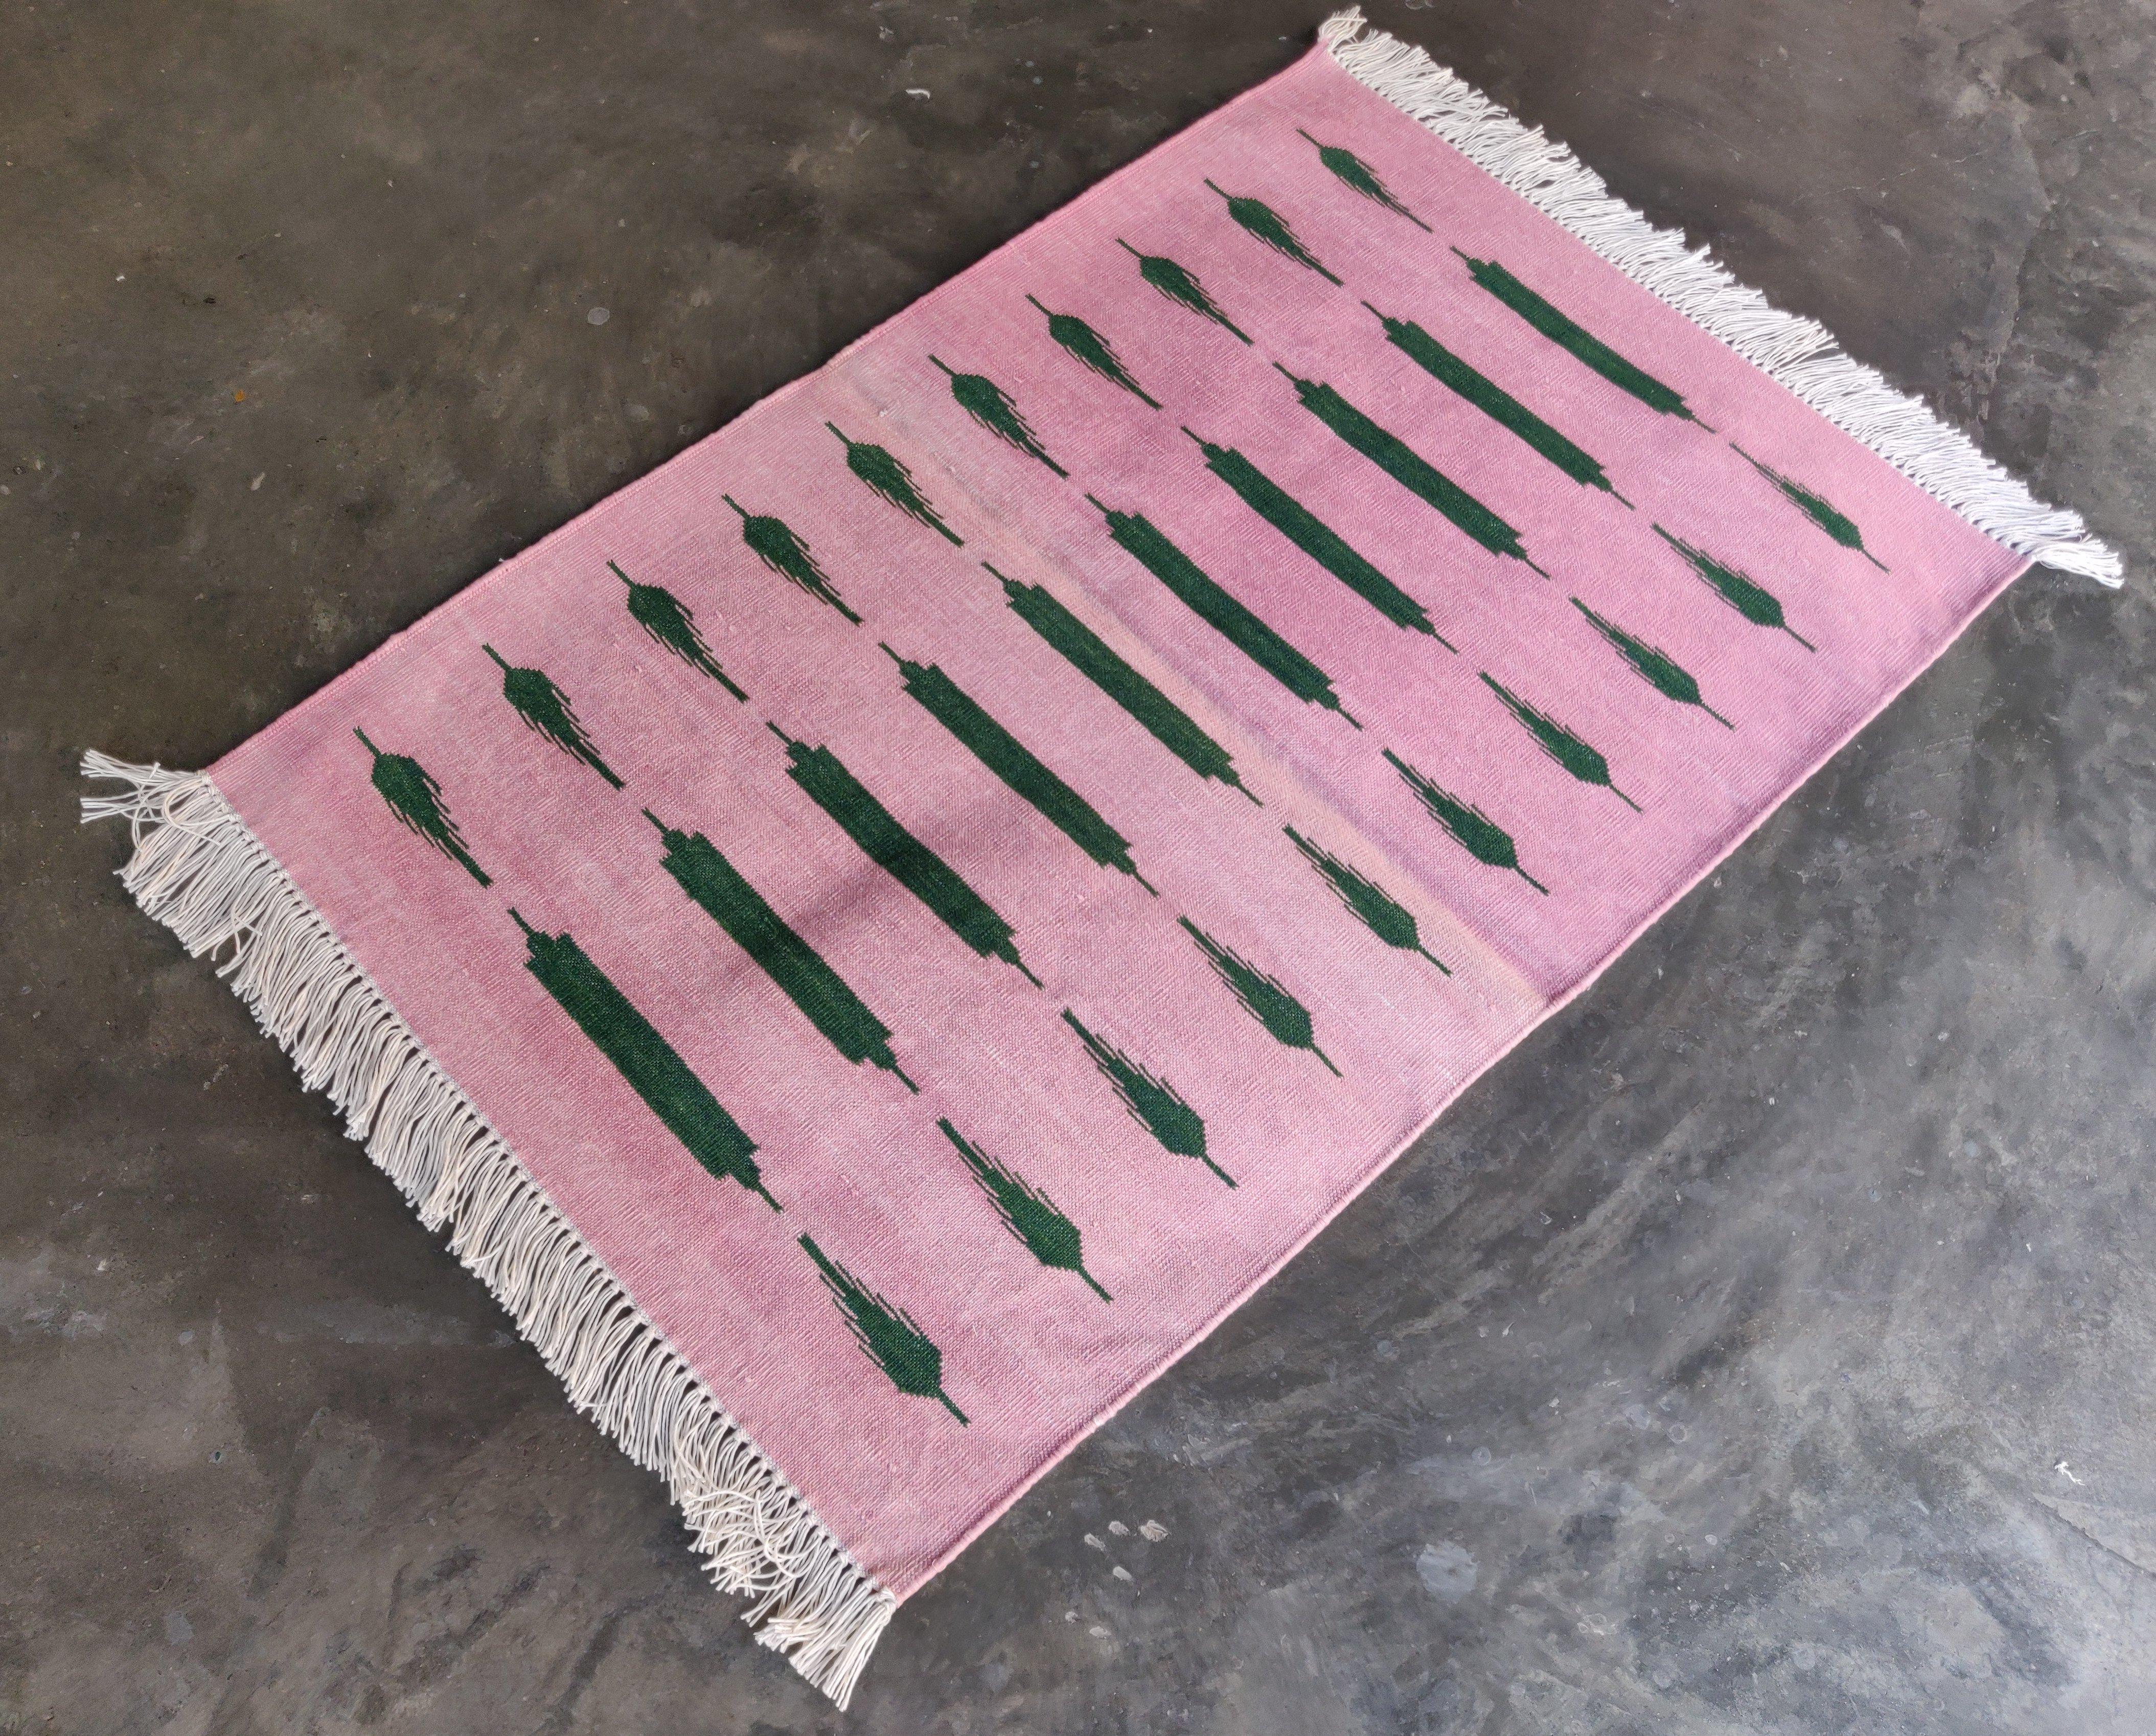 Cotton Vegetable Dyed  Pink And Green Striped Indian Dhurrie Rug - 2'x3' (60x90cm) 

These special flat-weave dhurries are hand-woven with 15 ply 100% cotton yarn. Due to the special manufacturing techniques used to create our rugs, the size and